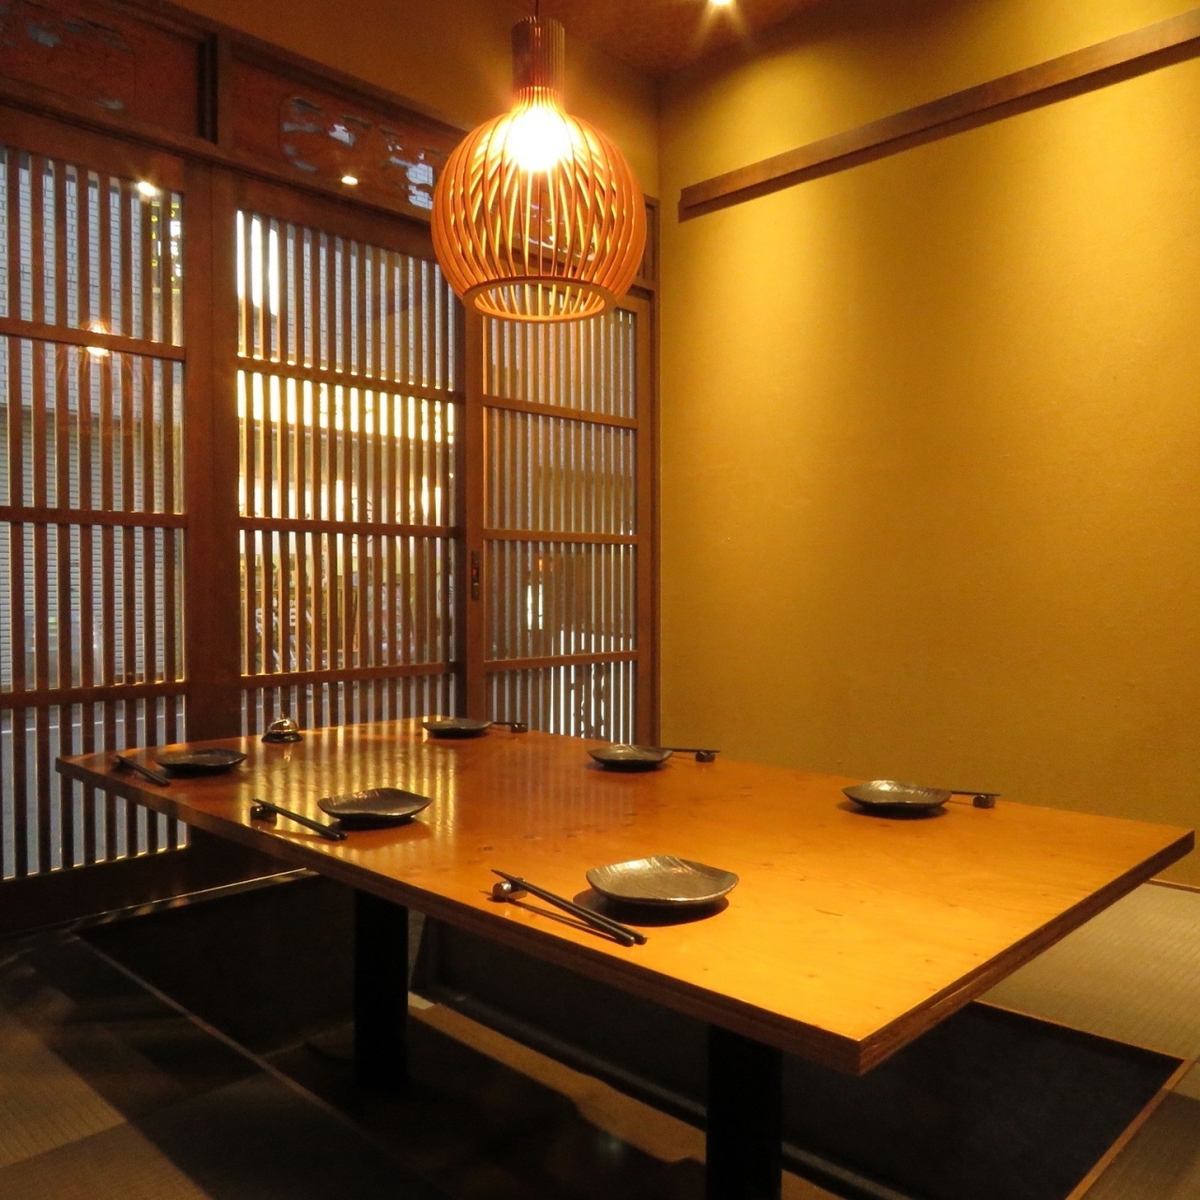 The private room with a sunken kotatsu seat can accommodate 6 to 8 people!